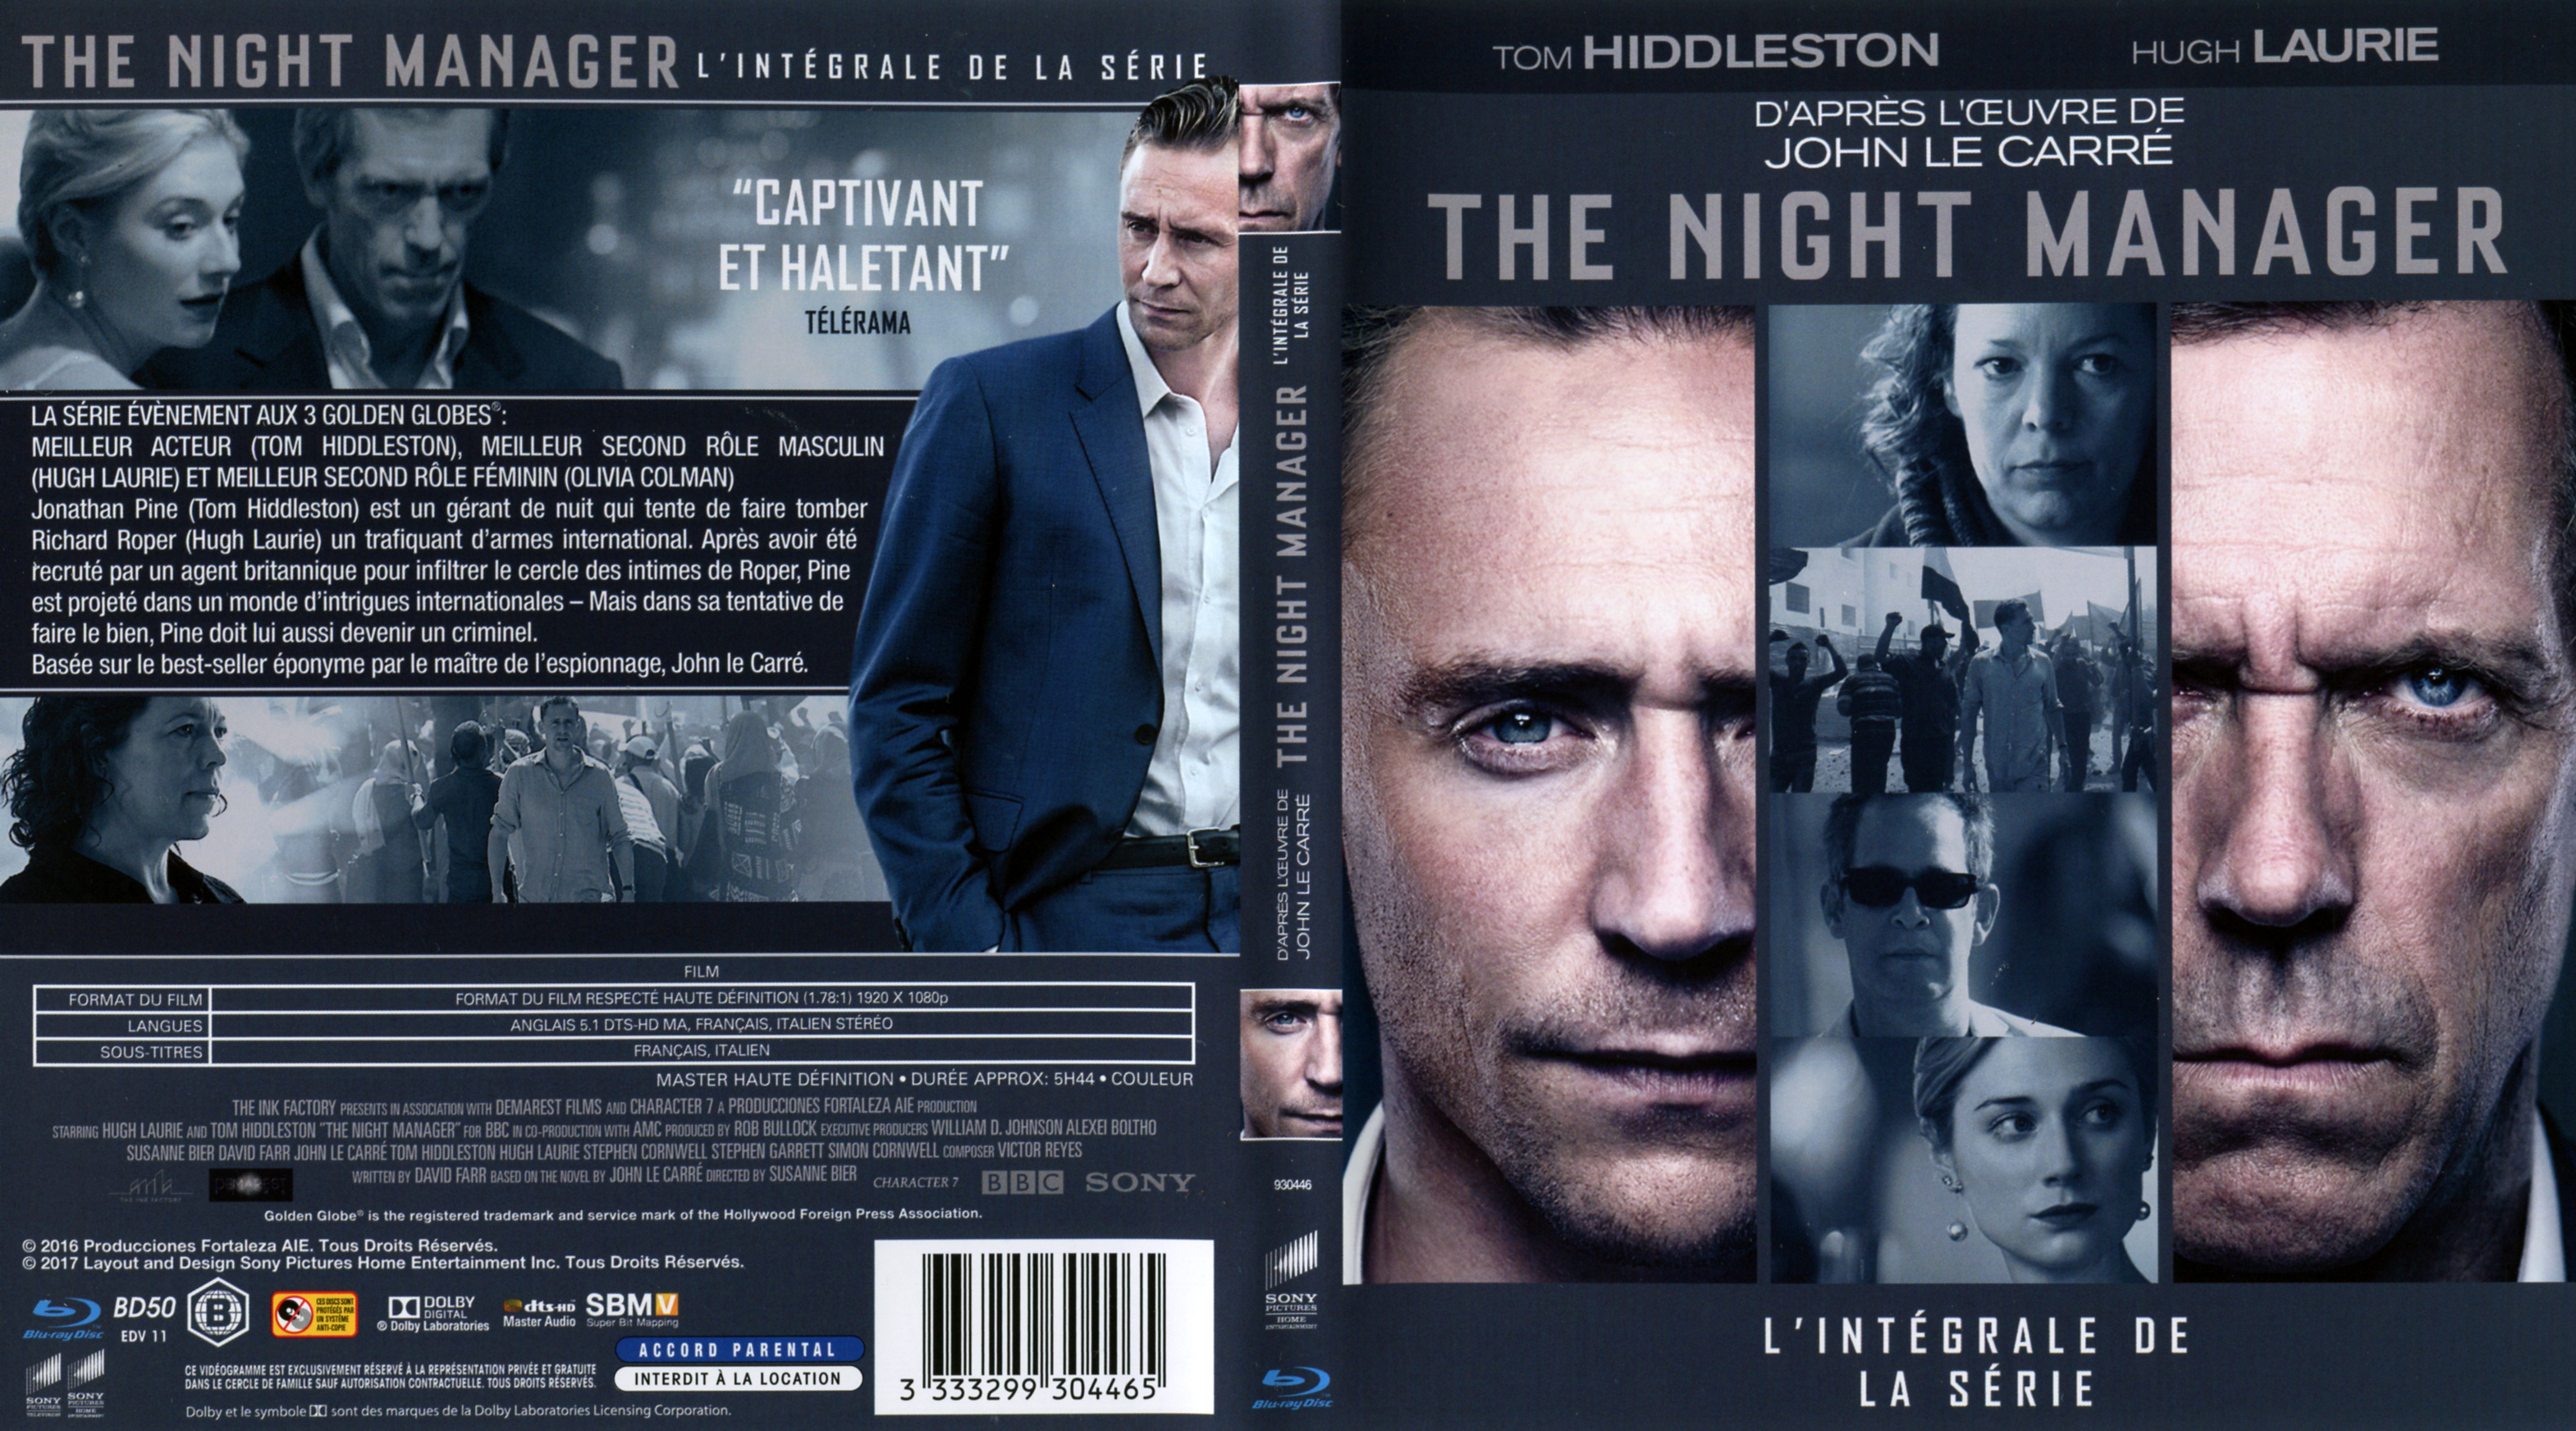 Jaquette DVD The night manager (BLU-RAY)